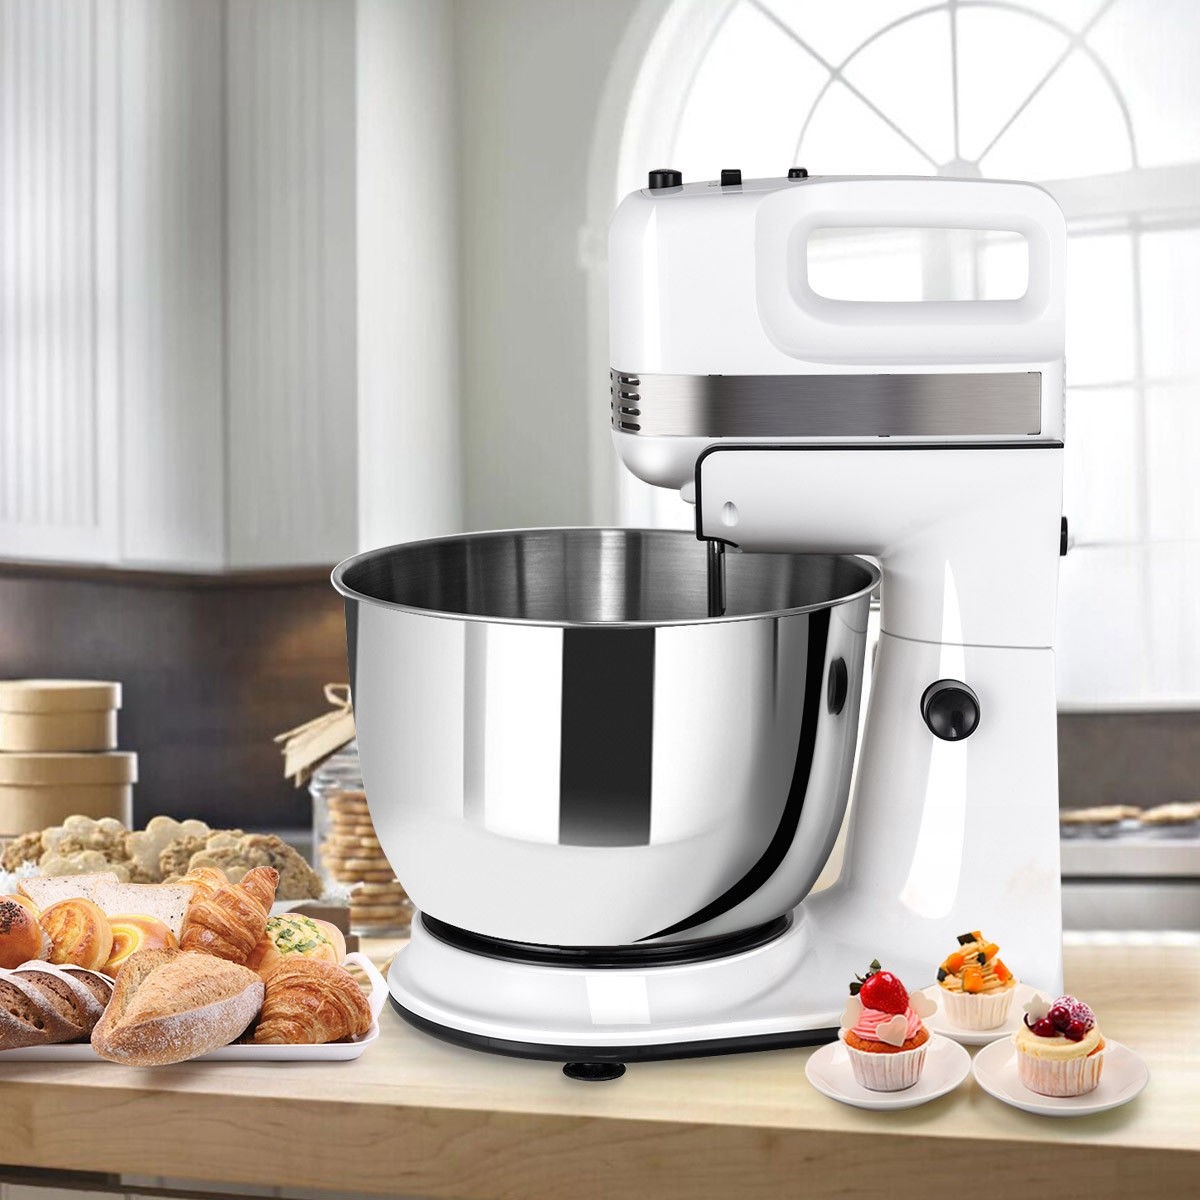 250W 5-Speed Stand Mixer W/ Dough Hooks Beaters And Stainless Steel Bowl